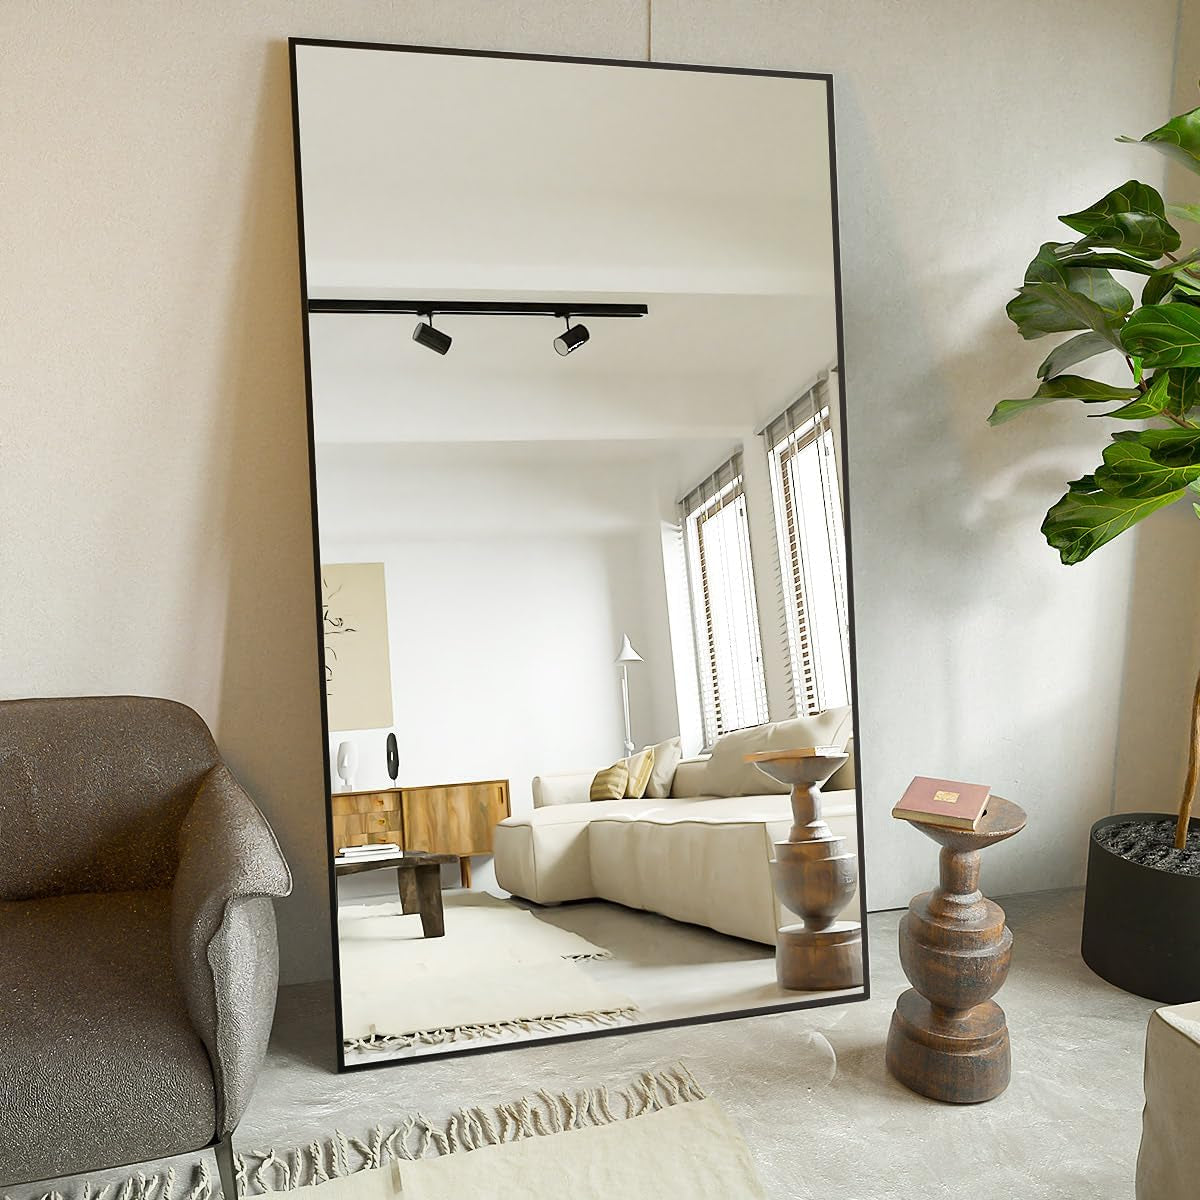 Large Mirror Full Length 34"X76", Floor Body Mirror with Stand, Metal Frame Wall-Mounted Vanity Mirror, Hanging Leaning or Standing, Black - Design By Technique